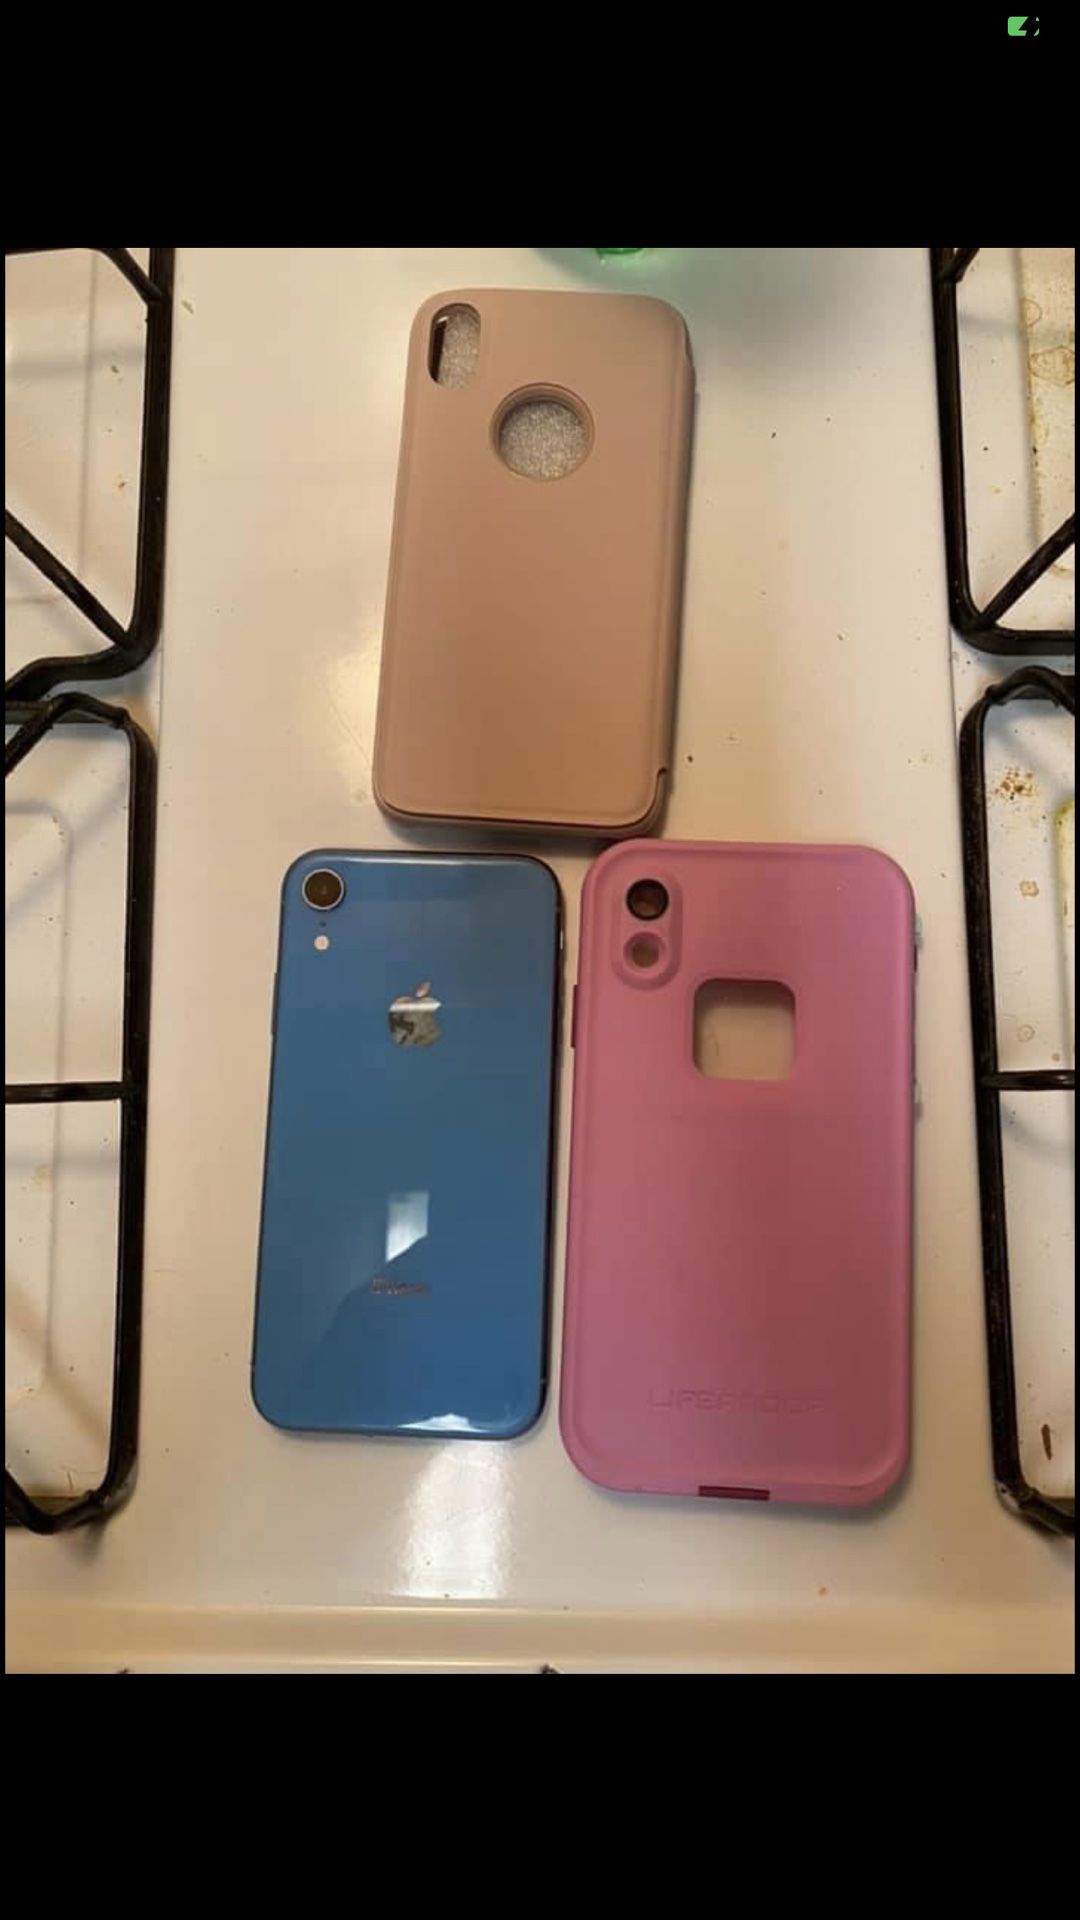 iPhone XR unlocked I’ve upgraded to a iPhone 11 I don’t need it anymore $300 or I can bring it down to $250 it’s in perfect condition